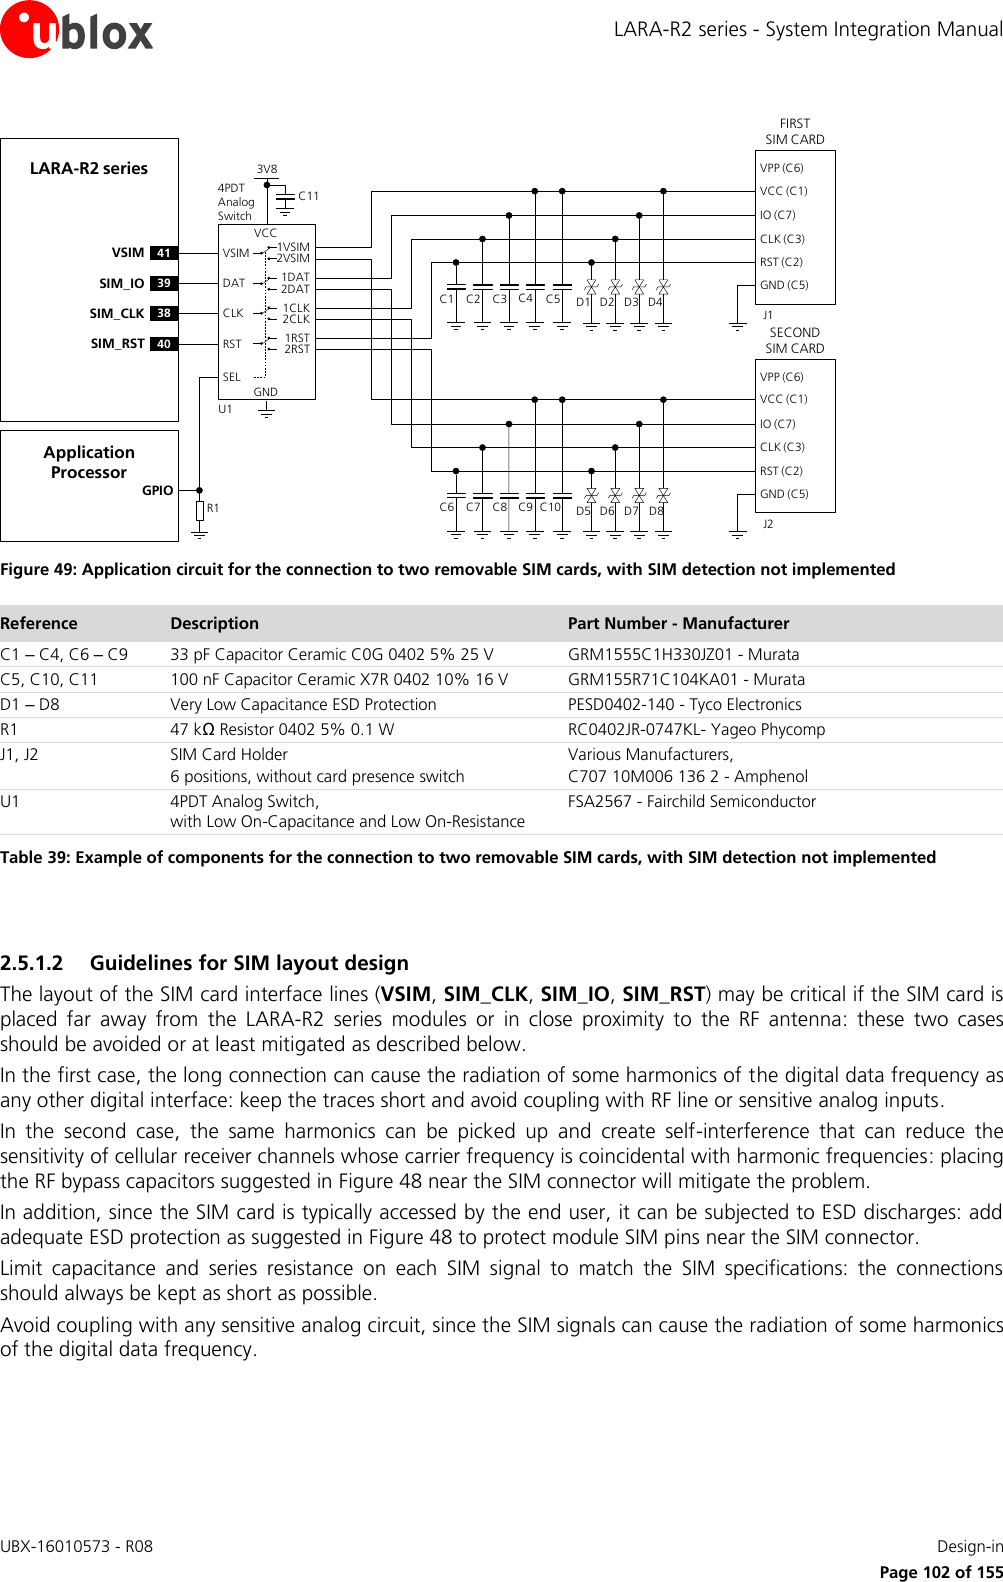 LARA-R2 series - System Integration Manual UBX-16010573 - R08    Design-in     Page 102 of 155 LARA-R2 seriesC1FIRST             SIM CARDVPP (C6)VCC (C1)IO (C7)CLK (C3)RST (C2)GND (C5)C2 C3 C5J1C4 D1 D2 D3 D4GNDU141VSIM VSIM 1VSIM2VSIMVCCC114PDT Analog Switch3V839SIM_IO DAT 1DAT2DAT38SIM_CLK CLK 1CLK2CLK40SIM_RST RST 1RST2RSTSELSECOND   SIM CARDVPP (C6)VCC (C1)IO (C7)CLK (C3)RST (C2)GND (C5)J2C6 C7 C8 C10C9 D5 D6 D7 D8Application ProcessorGPIOR1 Figure 49: Application circuit for the connection to two removable SIM cards, with SIM detection not implemented Reference Description Part Number - Manufacturer C1 – C4, C6 – C9 33 pF Capacitor Ceramic C0G 0402 5% 25 V GRM1555C1H330JZ01 - Murata C5, C10, C11 100 nF Capacitor Ceramic X7R 0402 10% 16 V GRM155R71C104KA01 - Murata D1 – D8 Very Low Capacitance ESD Protection PESD0402-140 - Tyco Electronics  R1 47 kΩ Resistor 0402 5% 0.1 W RC0402JR-0747KL- Yageo Phycomp J1, J2 SIM Card Holder 6 positions, without card presence switch Various Manufacturers, C707 10M006 136 2 - Amphenol U1 4PDT Analog Switch,  with Low On-Capacitance and Low On-Resistance FSA2567 - Fairchild Semiconductor Table 39: Example of components for the connection to two removable SIM cards, with SIM detection not implemented   2.5.1.2 Guidelines for SIM layout design The layout of the SIM card interface lines (VSIM, SIM_CLK, SIM_IO, SIM_RST) may be critical if the SIM card is placed  far  away  from  the  LARA-R2  series  modules  or  in  close  proximity  to  the  RF  antenna:  these  two  cases should be avoided or at least mitigated as described below.  In the first case, the long connection can cause the radiation of some harmonics of the digital data frequency as any other digital interface: keep the traces short and avoid coupling with RF line or sensitive analog inputs. In  the  second  case,  the  same  harmonics  can  be  picked  up  and  create  self-interference  that  can  reduce  the sensitivity of cellular receiver channels whose carrier frequency is coincidental with harmonic frequencies: placing the RF bypass capacitors suggested in Figure 48 near the SIM connector will mitigate the problem. In addition, since the SIM card is typically accessed by the end user, it can be subjected to ESD discharges: add adequate ESD protection as suggested in Figure 48 to protect module SIM pins near the SIM connector. Limit  capacitance  and  series  resistance  on  each  SIM  signal  to  match  the  SIM  specifications:  the  connections should always be kept as short as possible. Avoid coupling with any sensitive analog circuit, since the SIM signals can cause the radiation of some harmonics of the digital data frequency.  